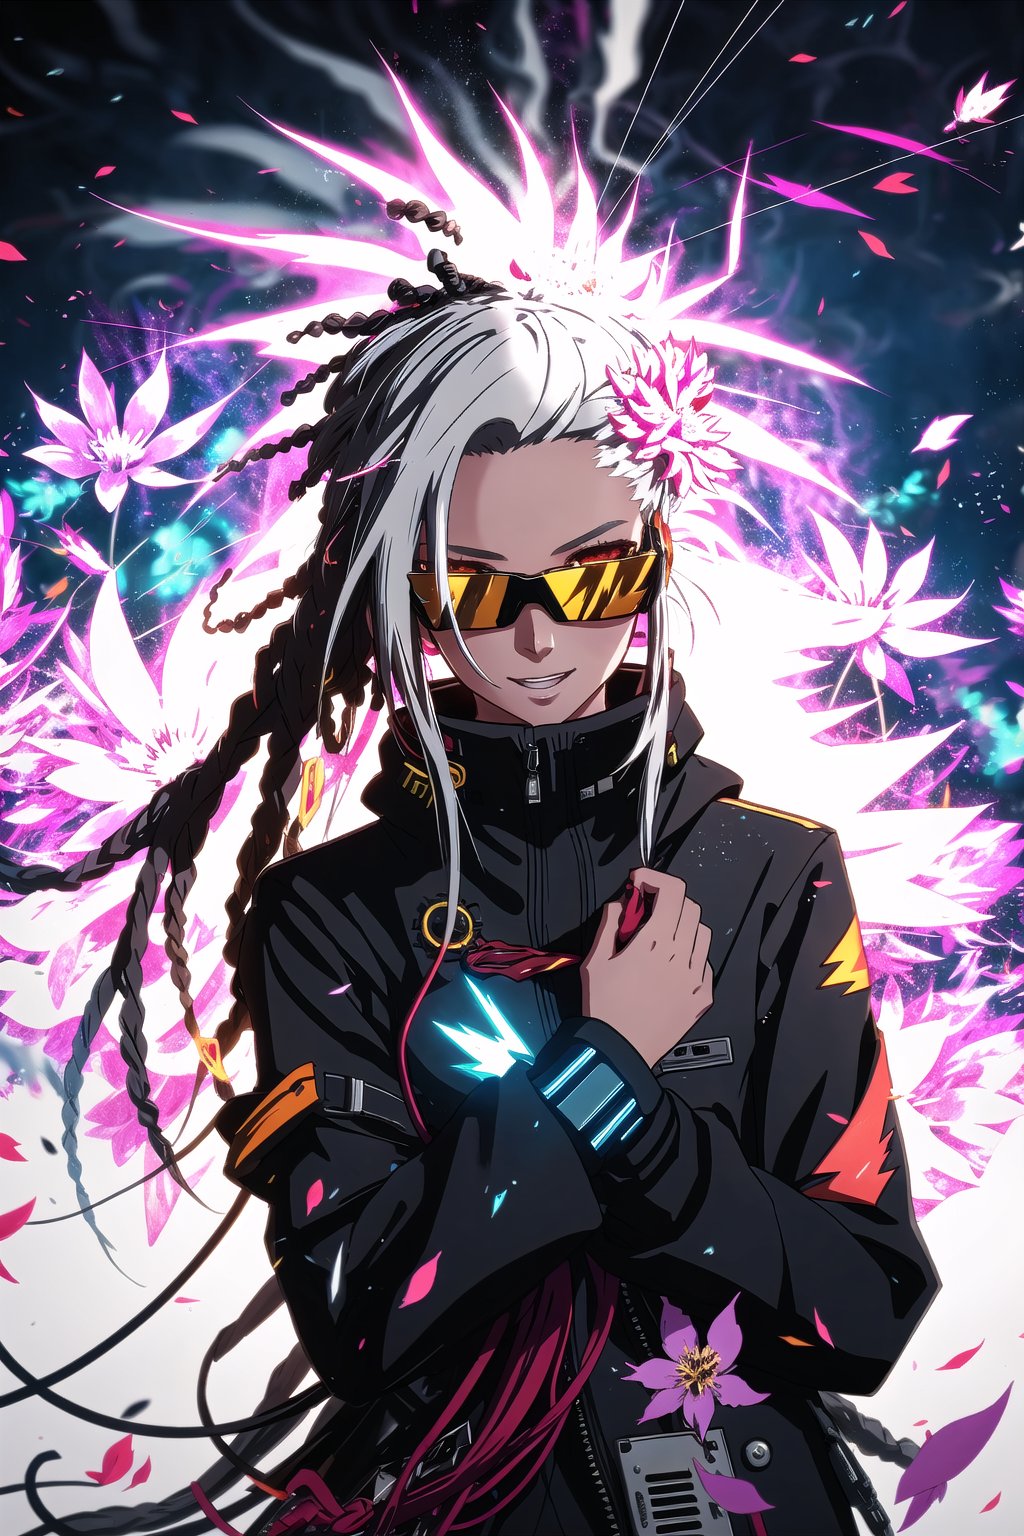 guiltys, happy, a girl, pixel glasses on, gray dreads hair, showing love, upper body, deal with it, (bokeh:1.1), depth of field, style of Anne Bachelier, tracers, vfx, splashes, lightning, light particles, electric, white background,in flowers